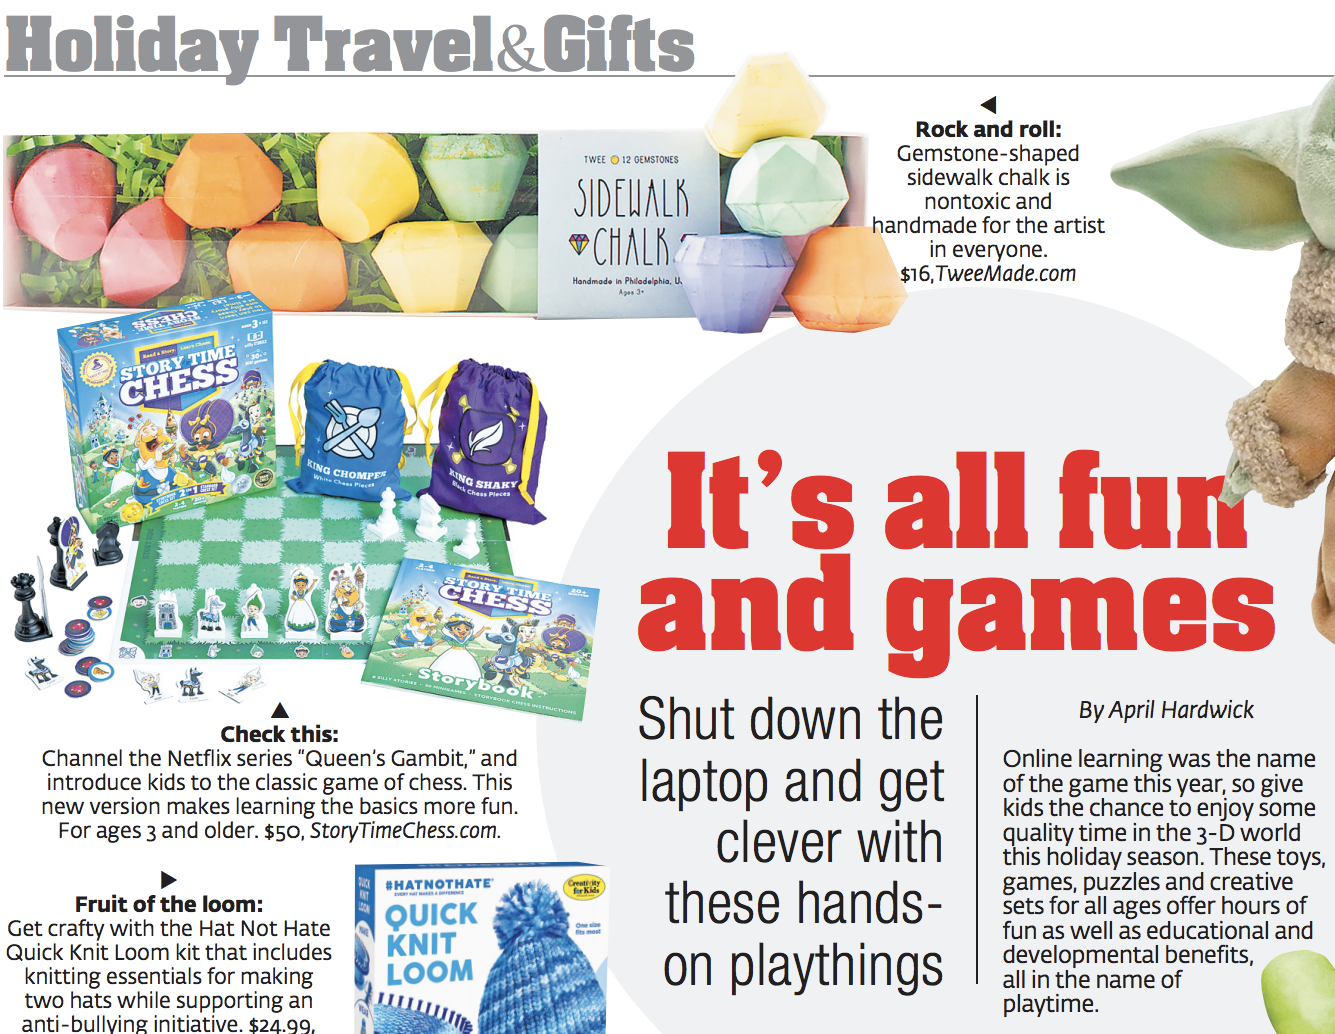 NY POST TWEE Gift Guide